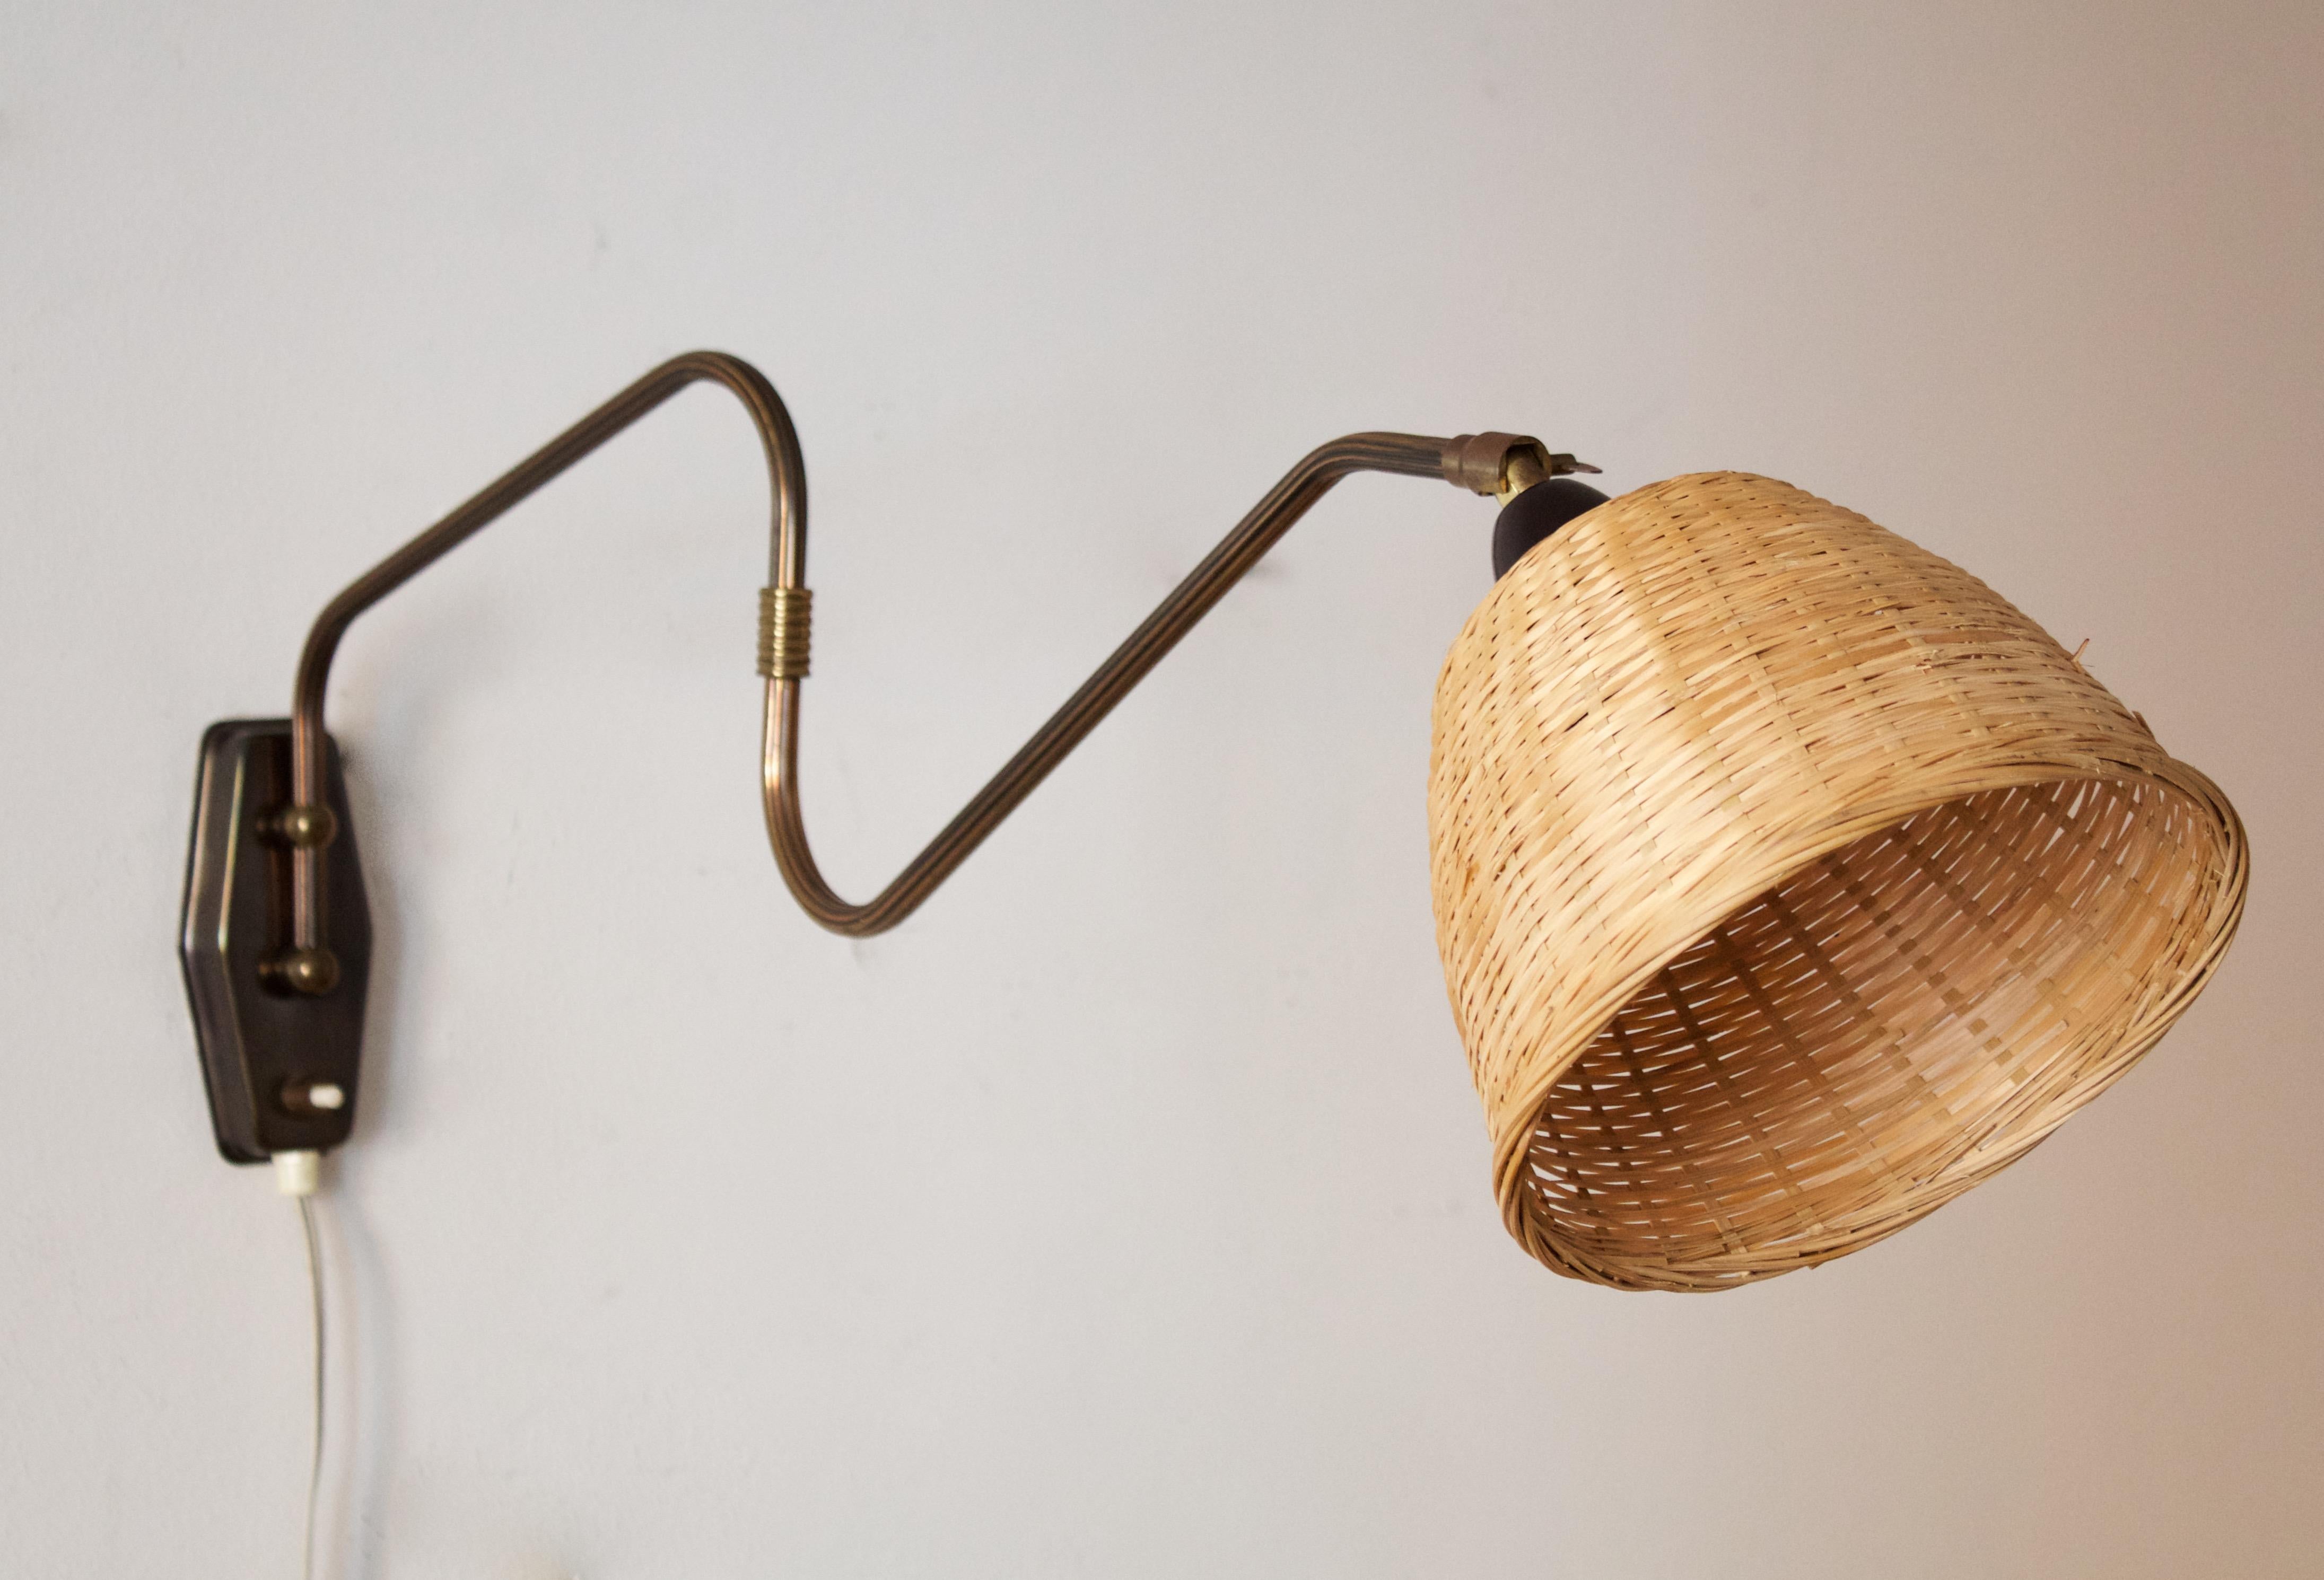 A small functionalist wall light / task light, designed and produced in Denmark, 1940s. Features brass, metal. Assorted Vintage rattan lampshade.

Stated dimensions with lampshade attached as is illustrated in the primary image.